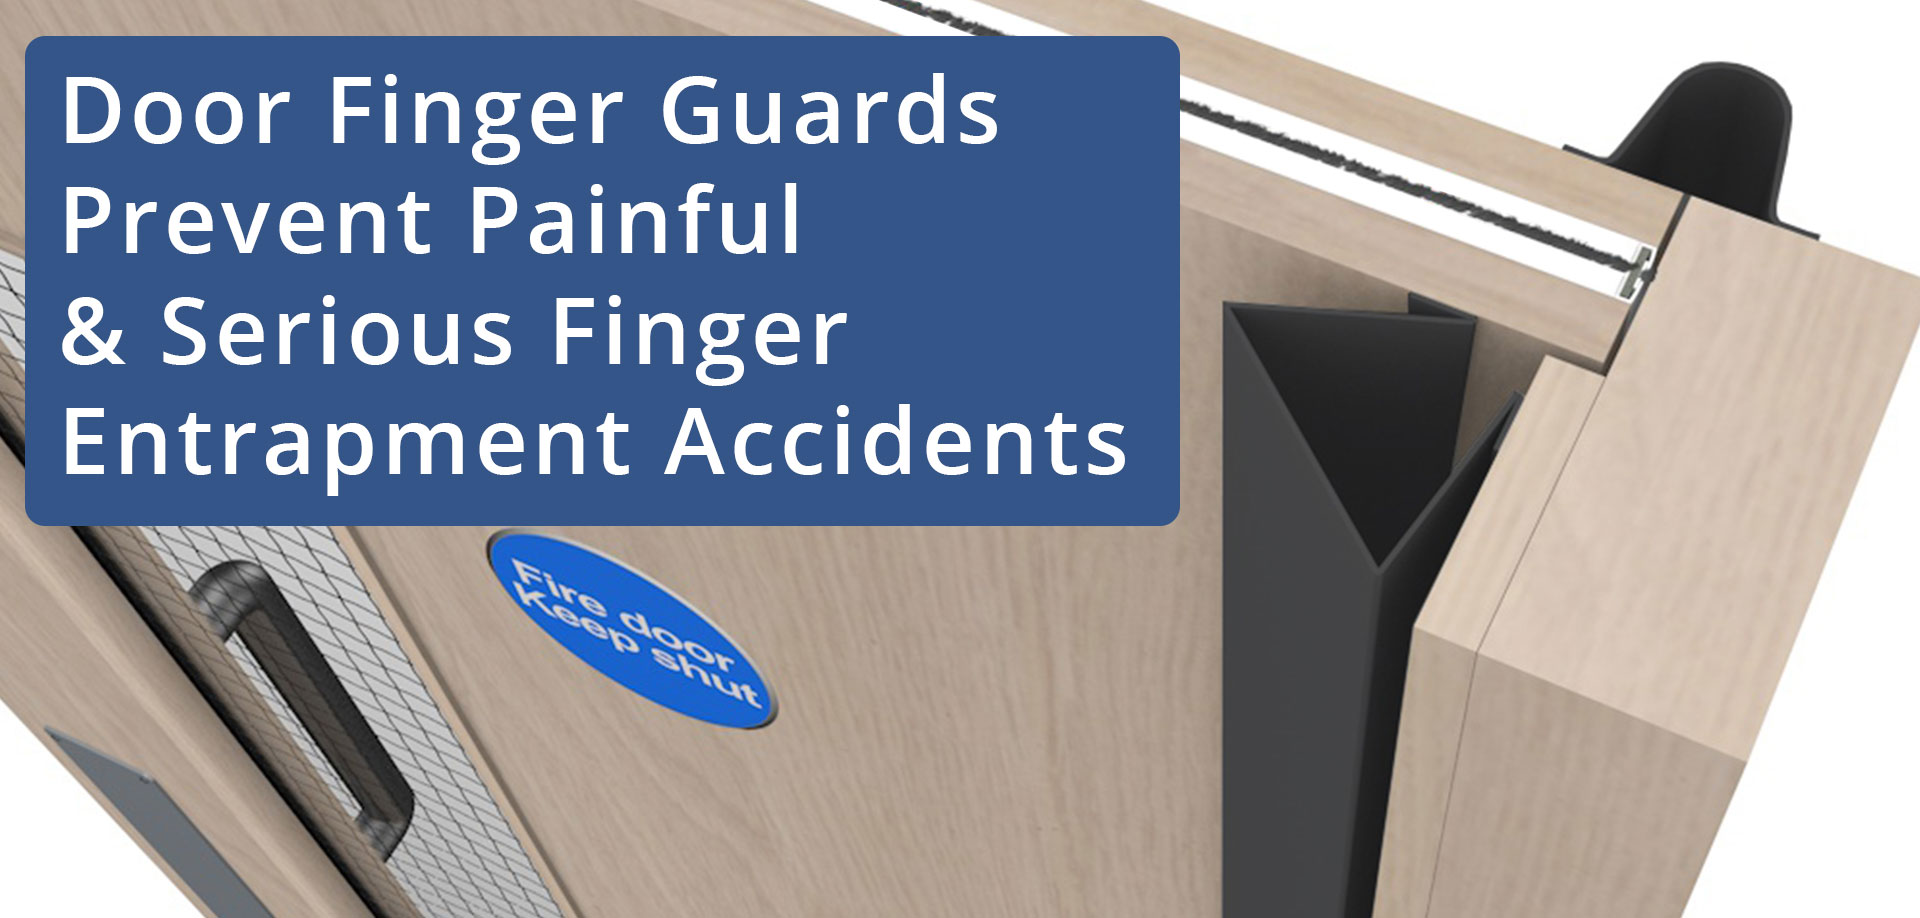 Fingerguards and safety products perfect for schools, nurseries, commerical units and public buildings